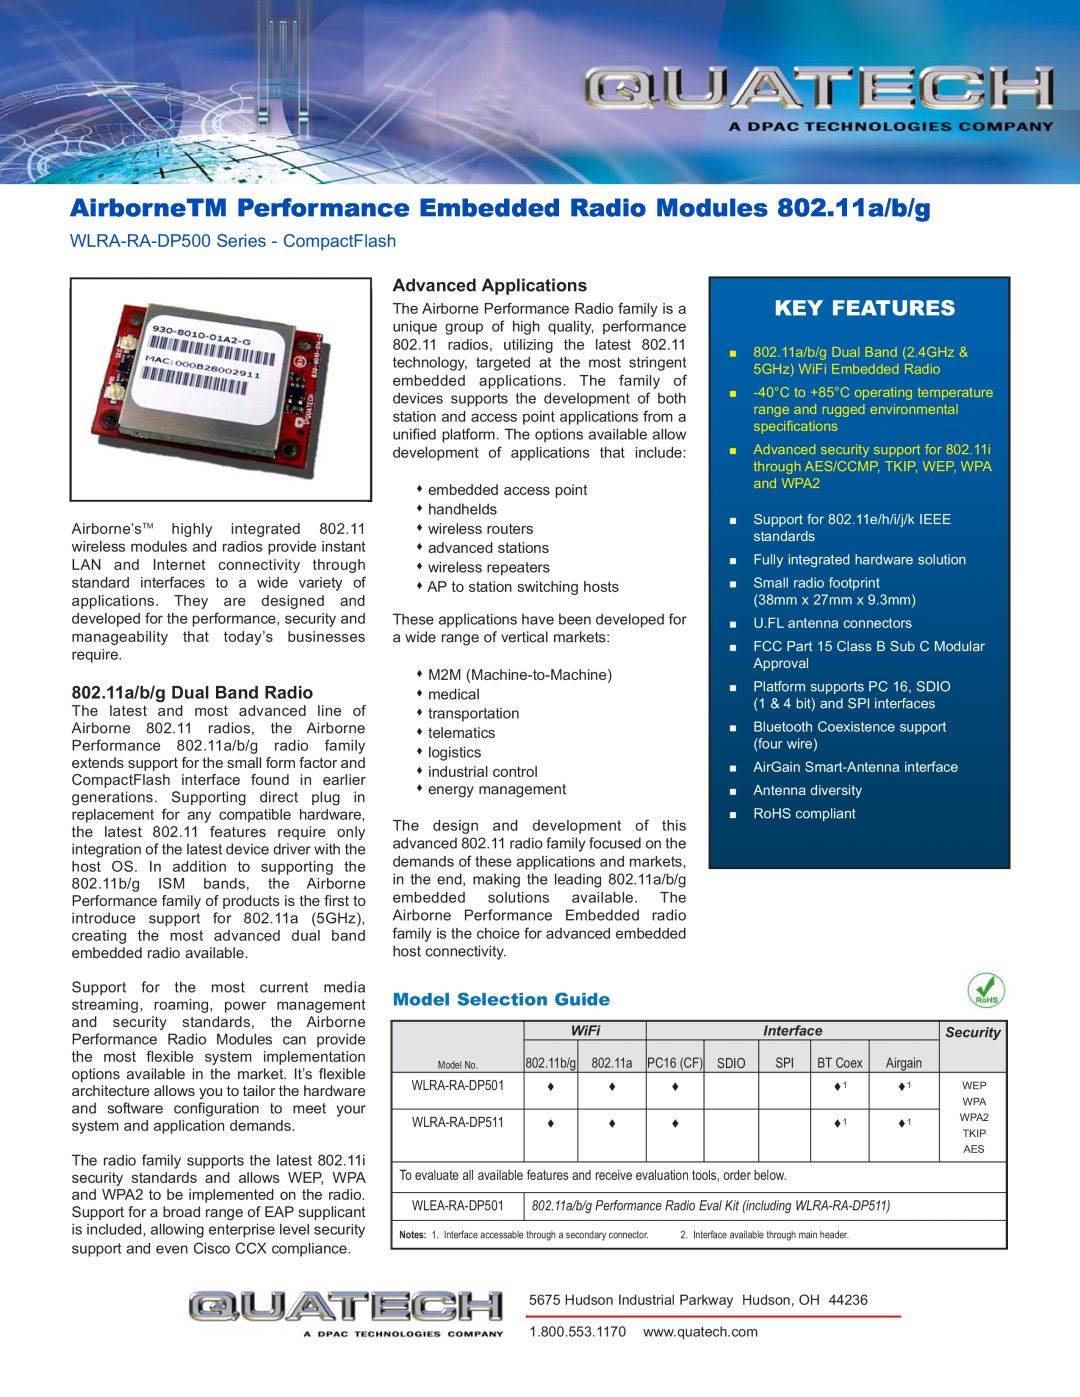 Quatech WLRA-RA-DP511 specifications Model Selection Guide, AirborneTM Performance Embedded Radio Modules 802.11a/b/g 